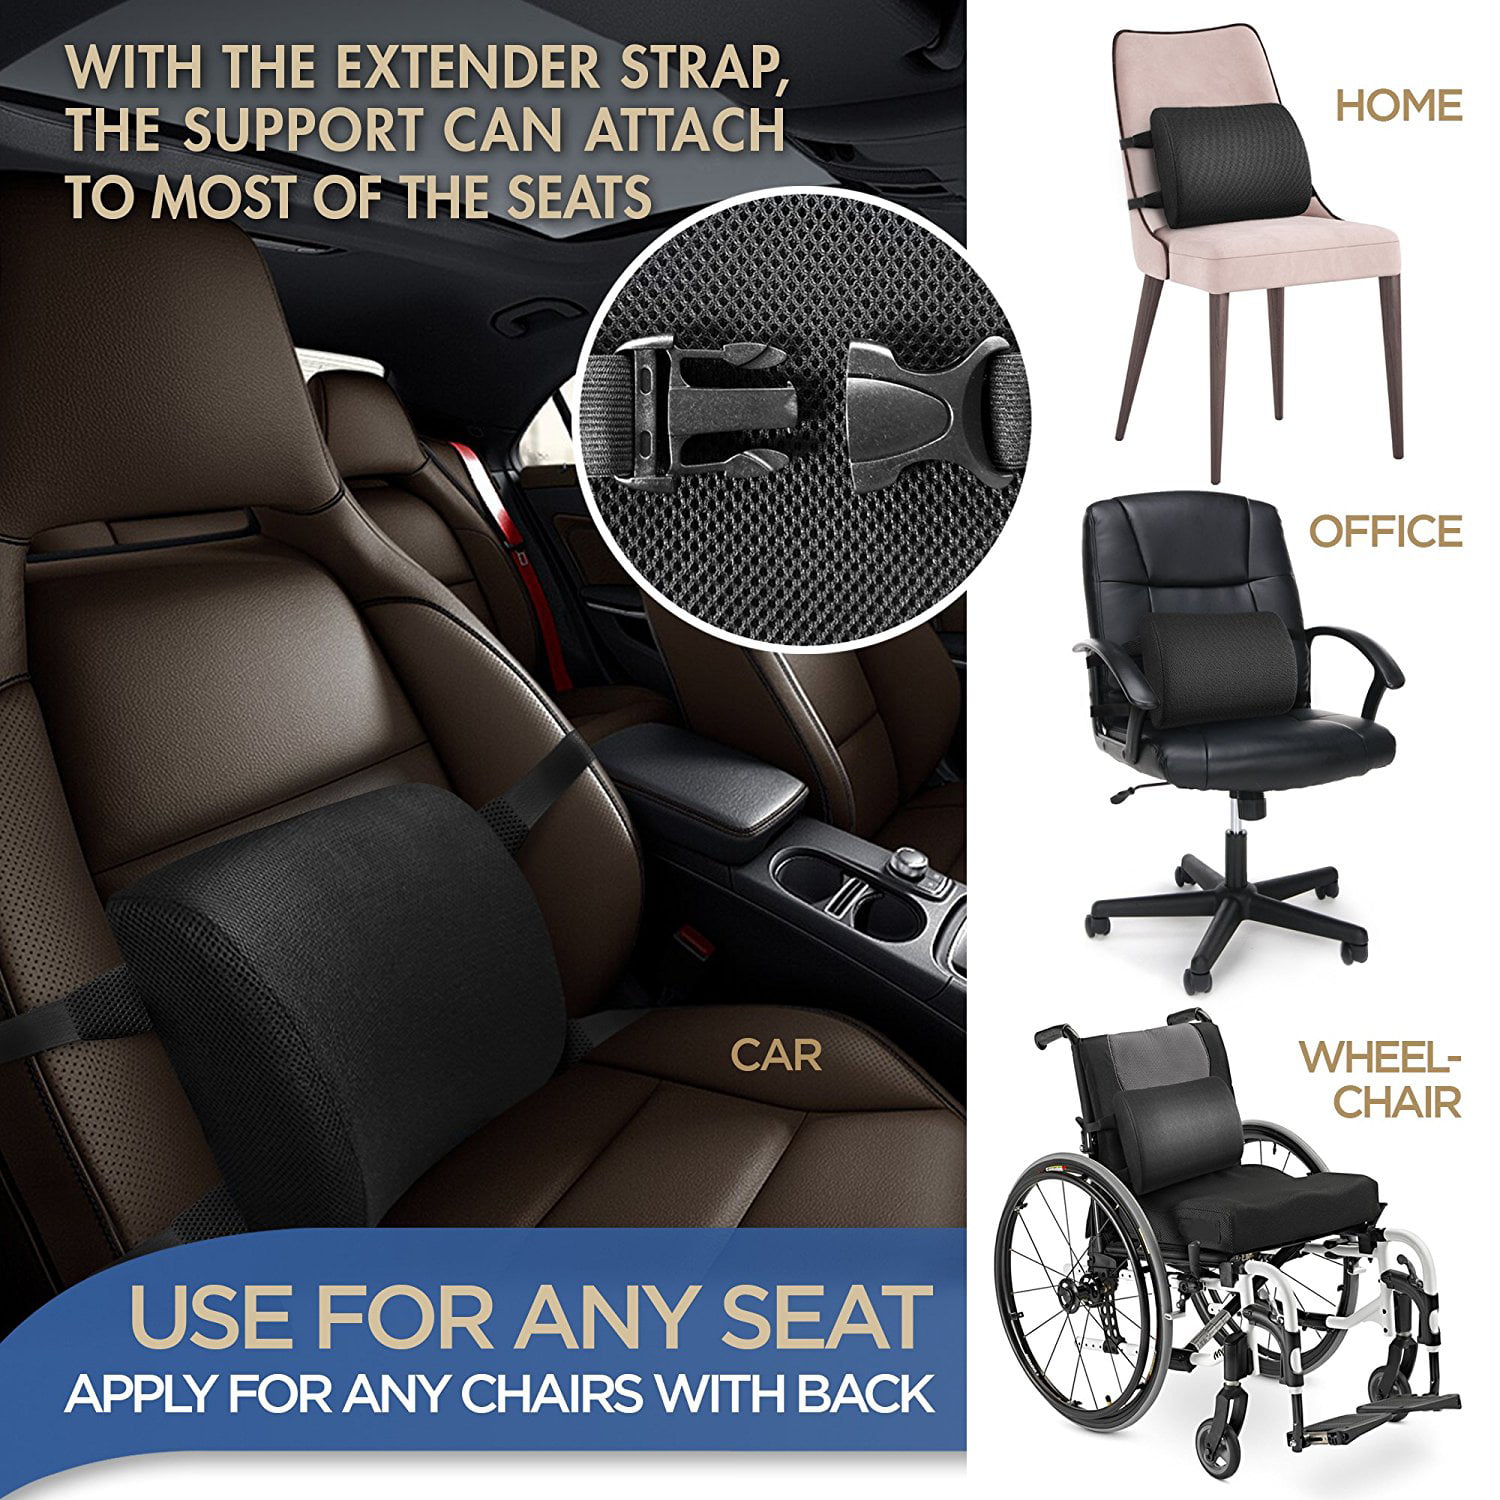 Office Chair and Wheelchair Hip Big Hippo Orthopedic Seat Cushion and Lumbar Support Pillow for Car Coccyx & Sciatica Pain Relief Tailbone Truck Idea for Lower Back 